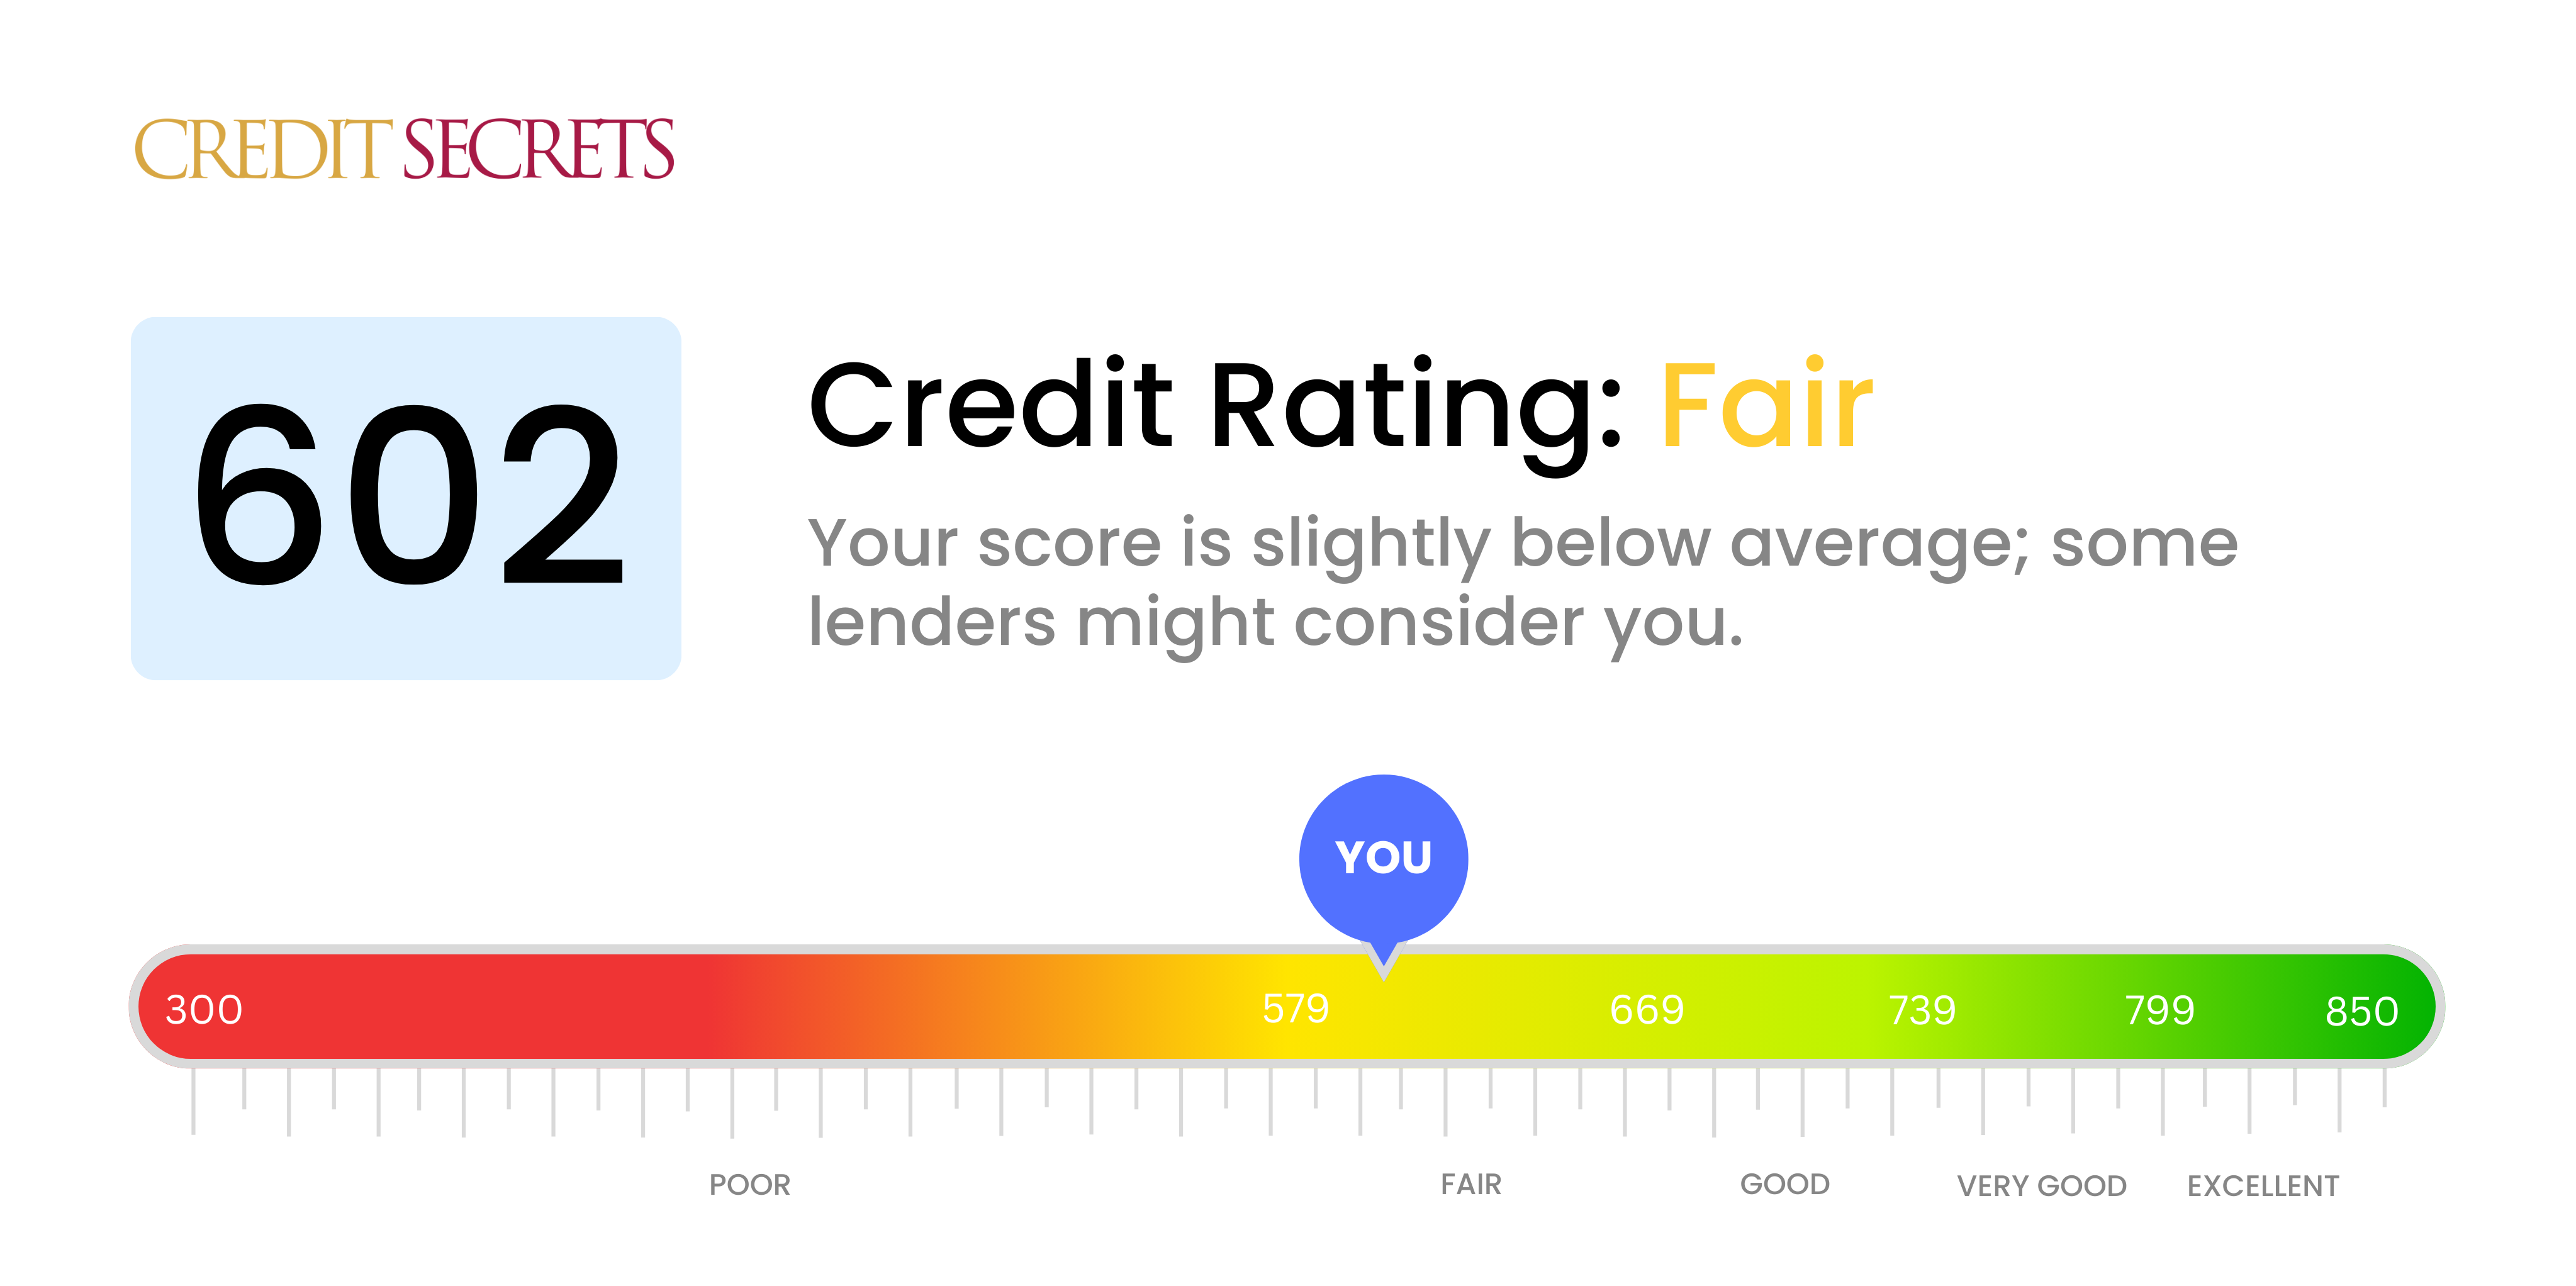 Is 602 a good credit score?